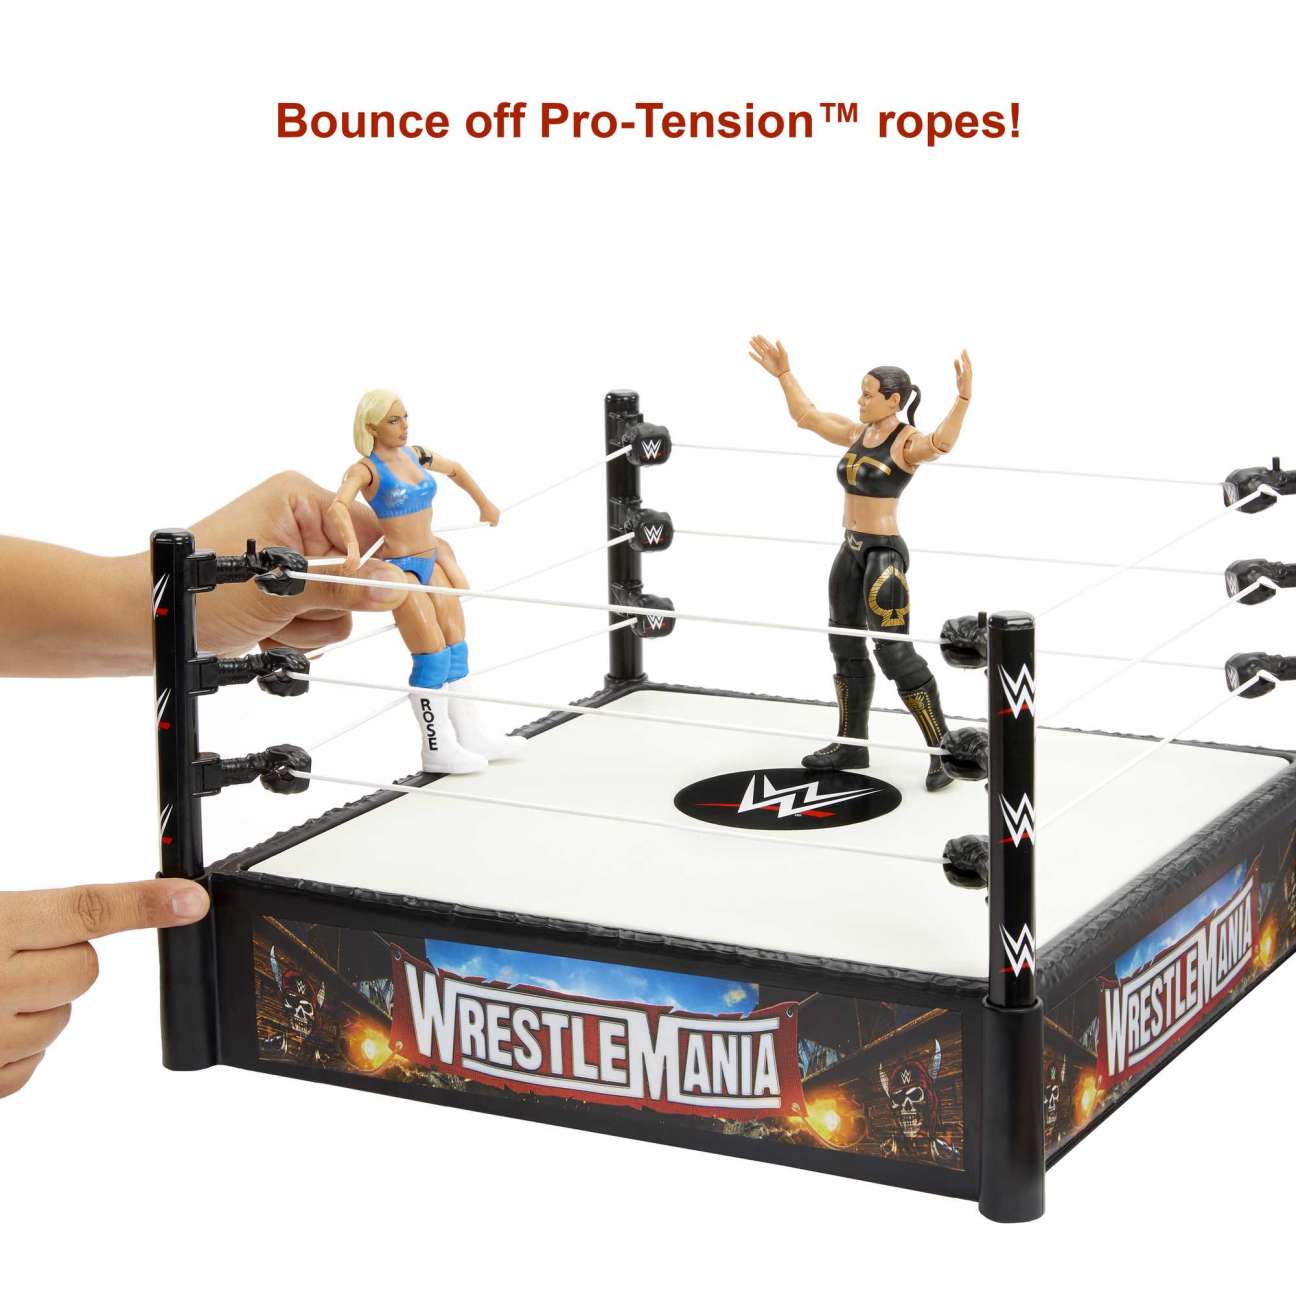 WWE Action Figure Toy Starter Pack Bundle - Ring, 2 x Figures, Accessories